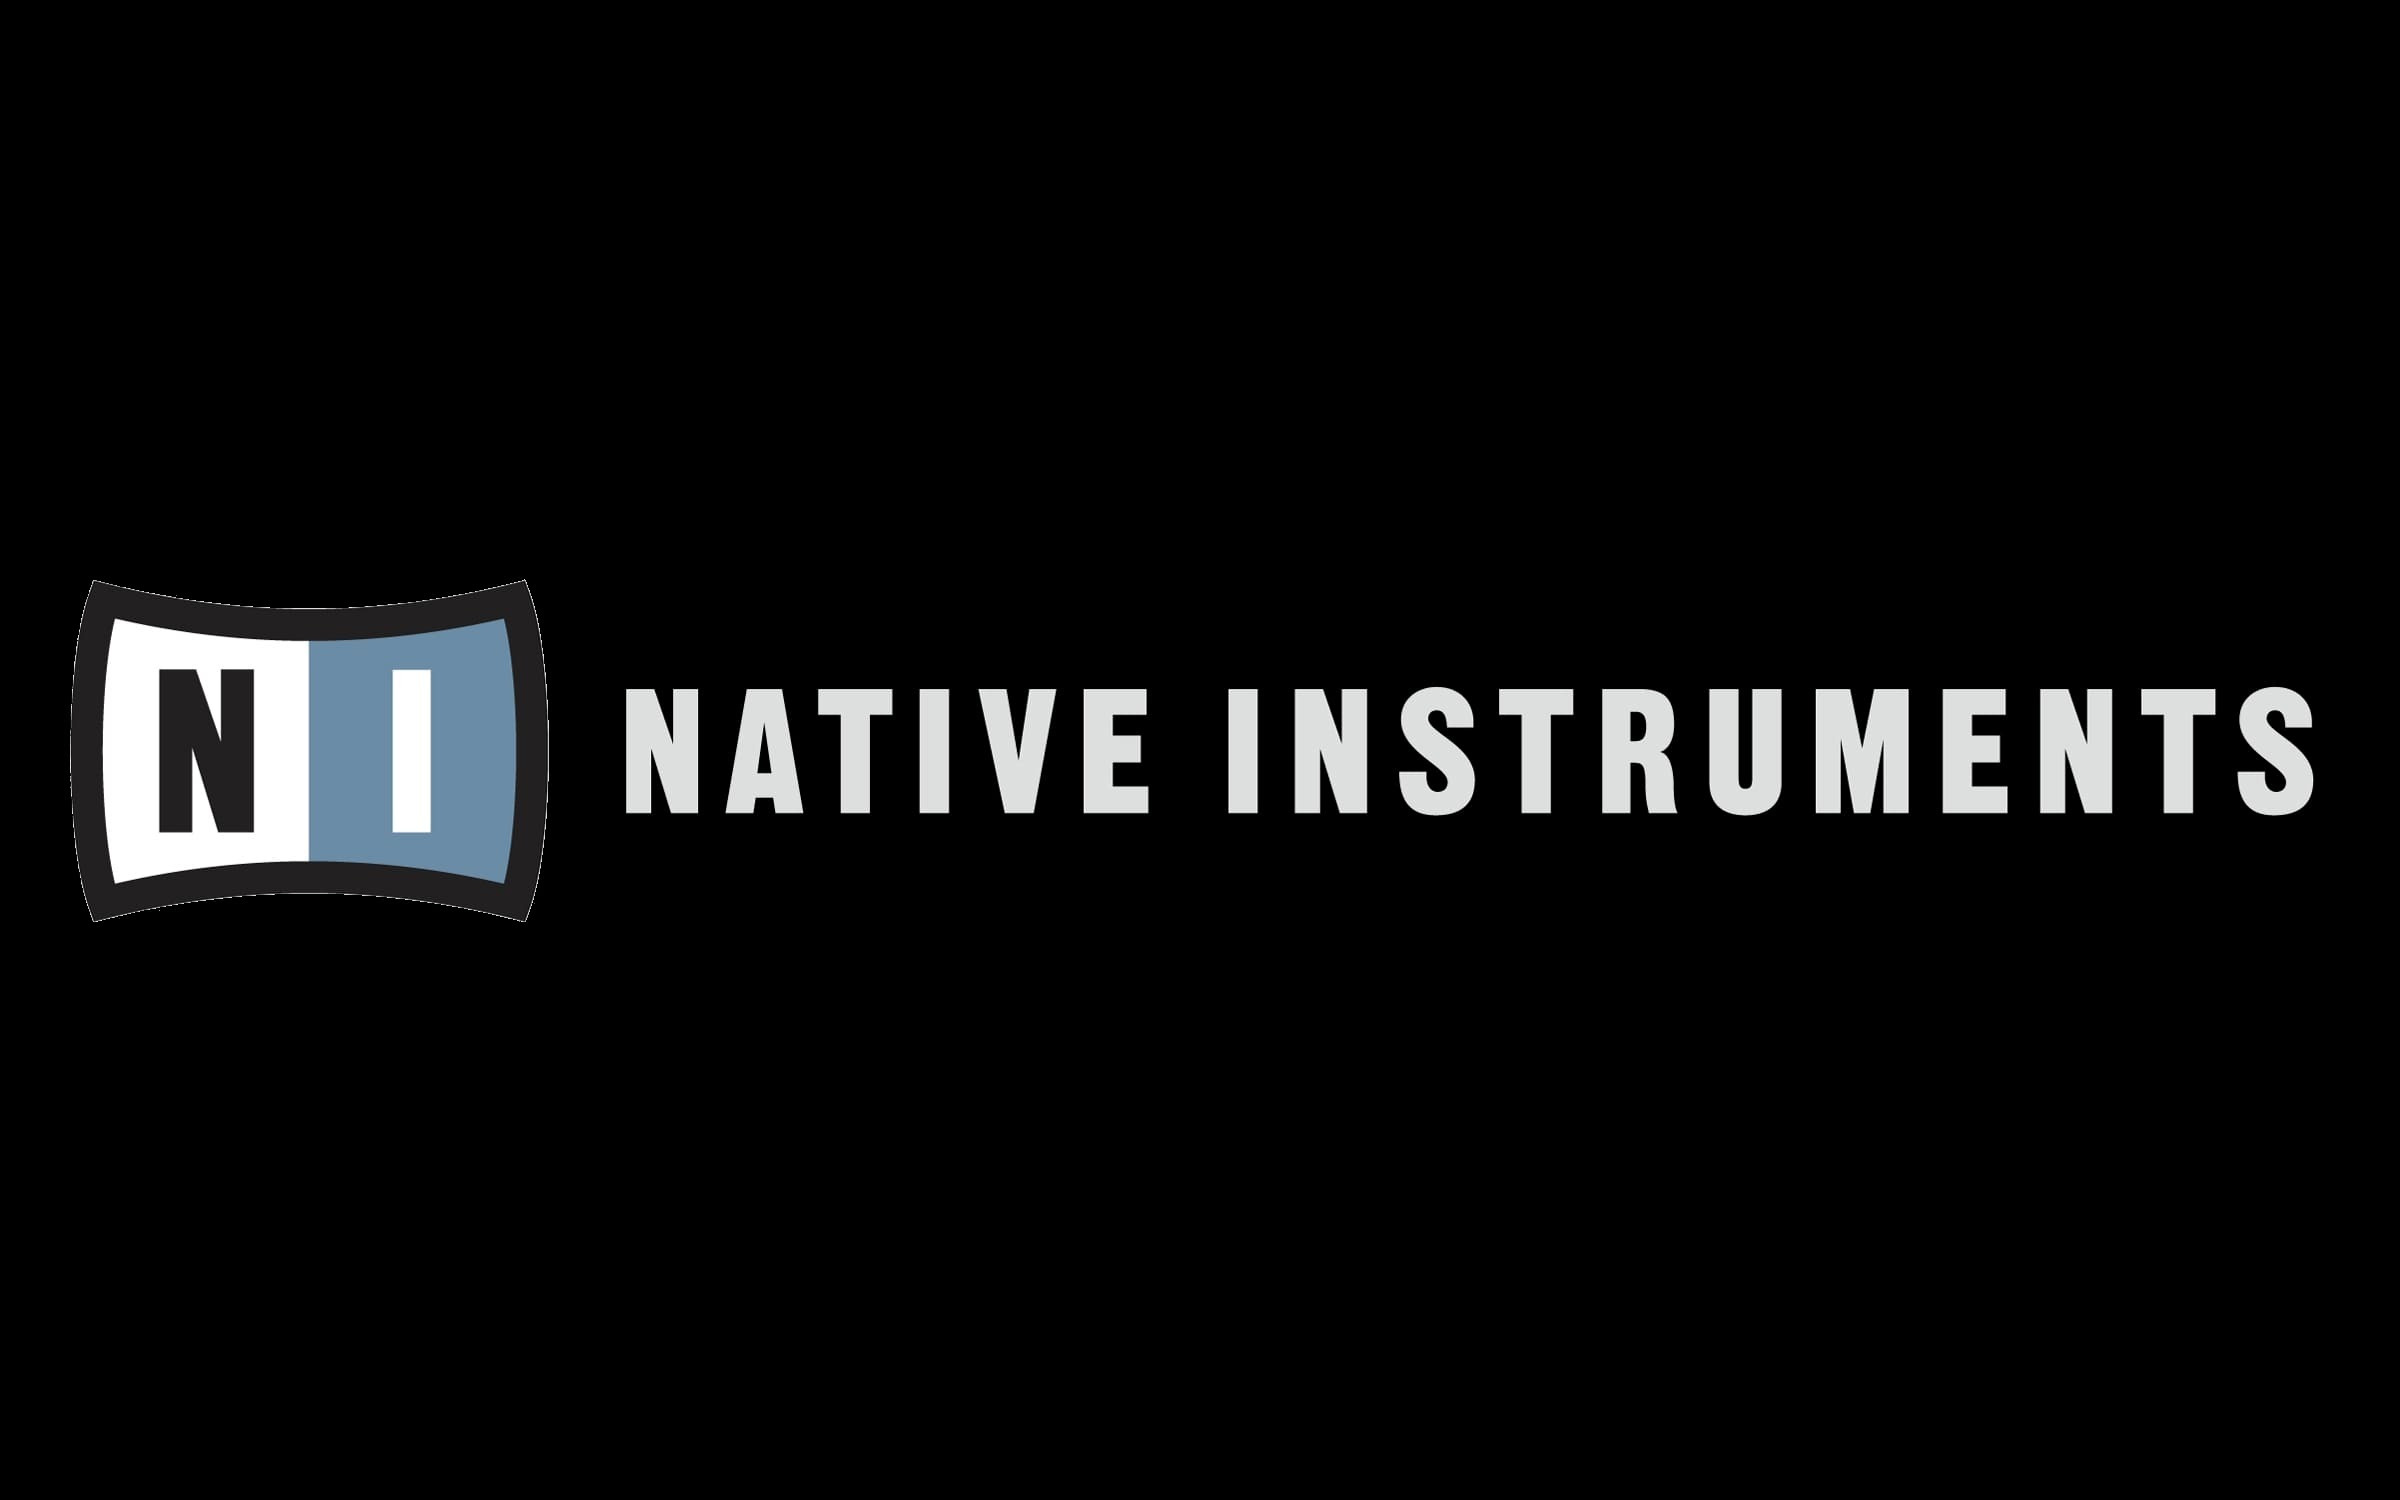 Image 3) Native_Instruments With D7 Media institute